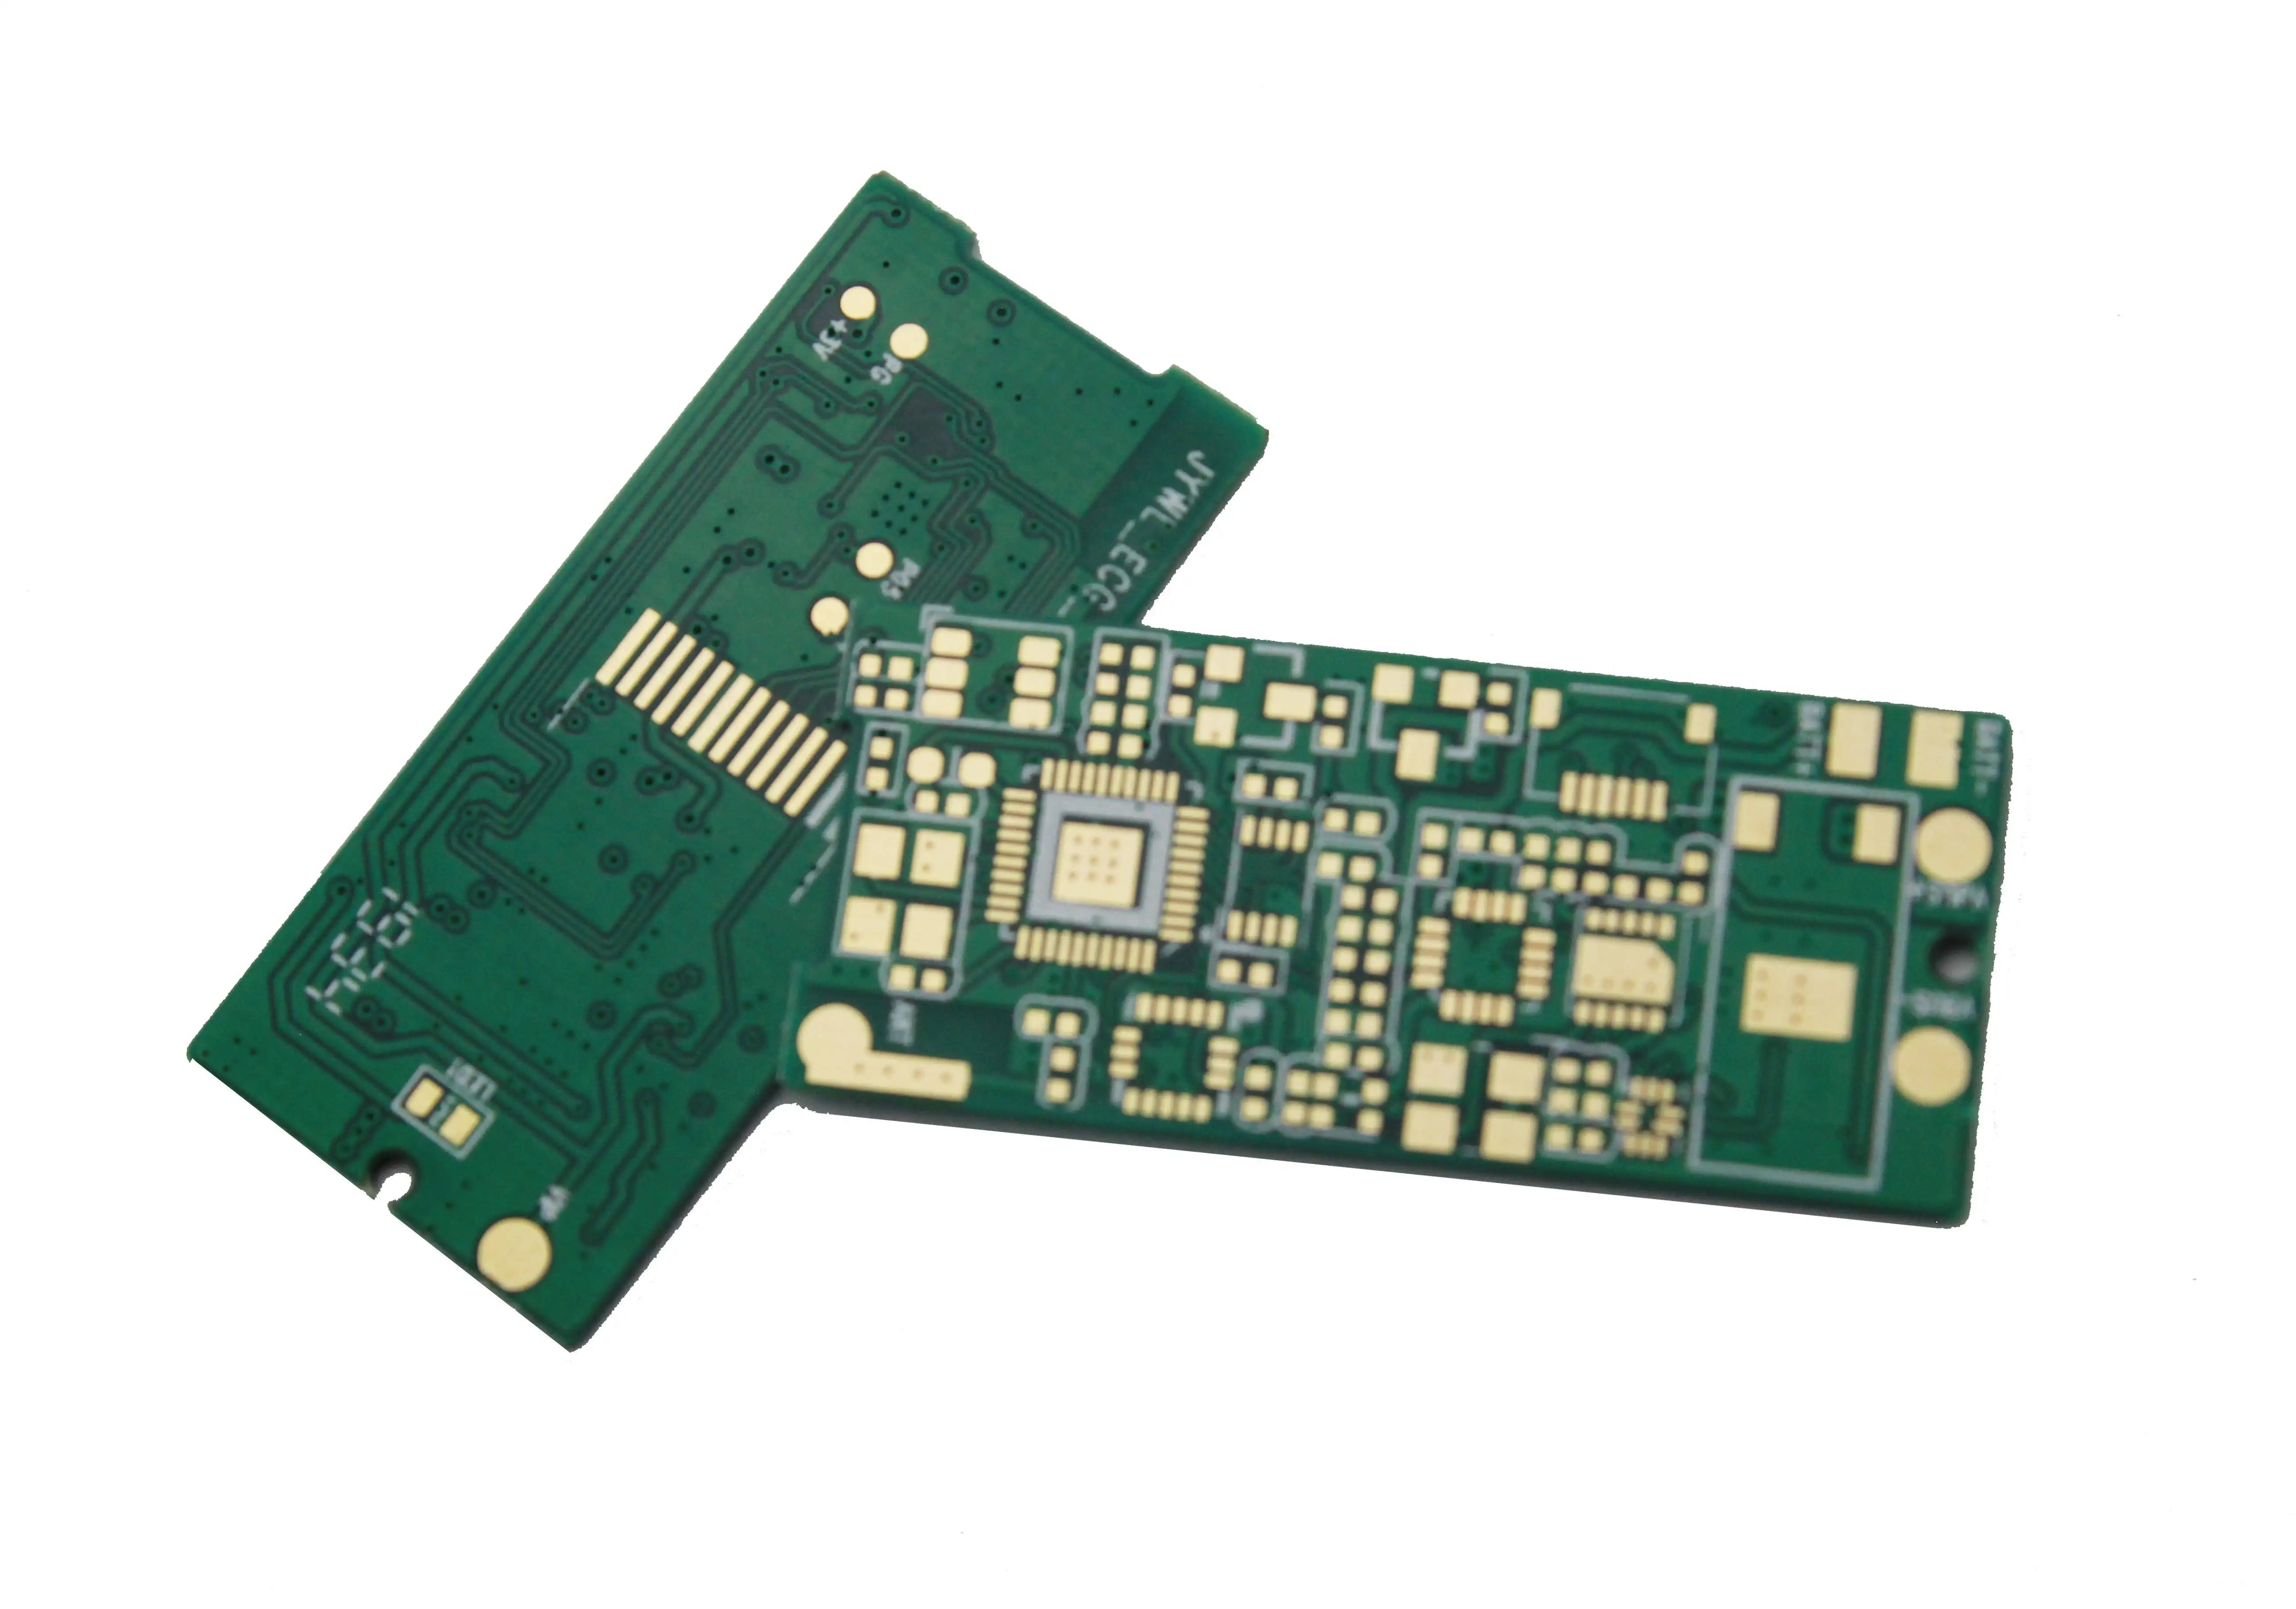 Measures to prevent copper surface oxidation during PCB production